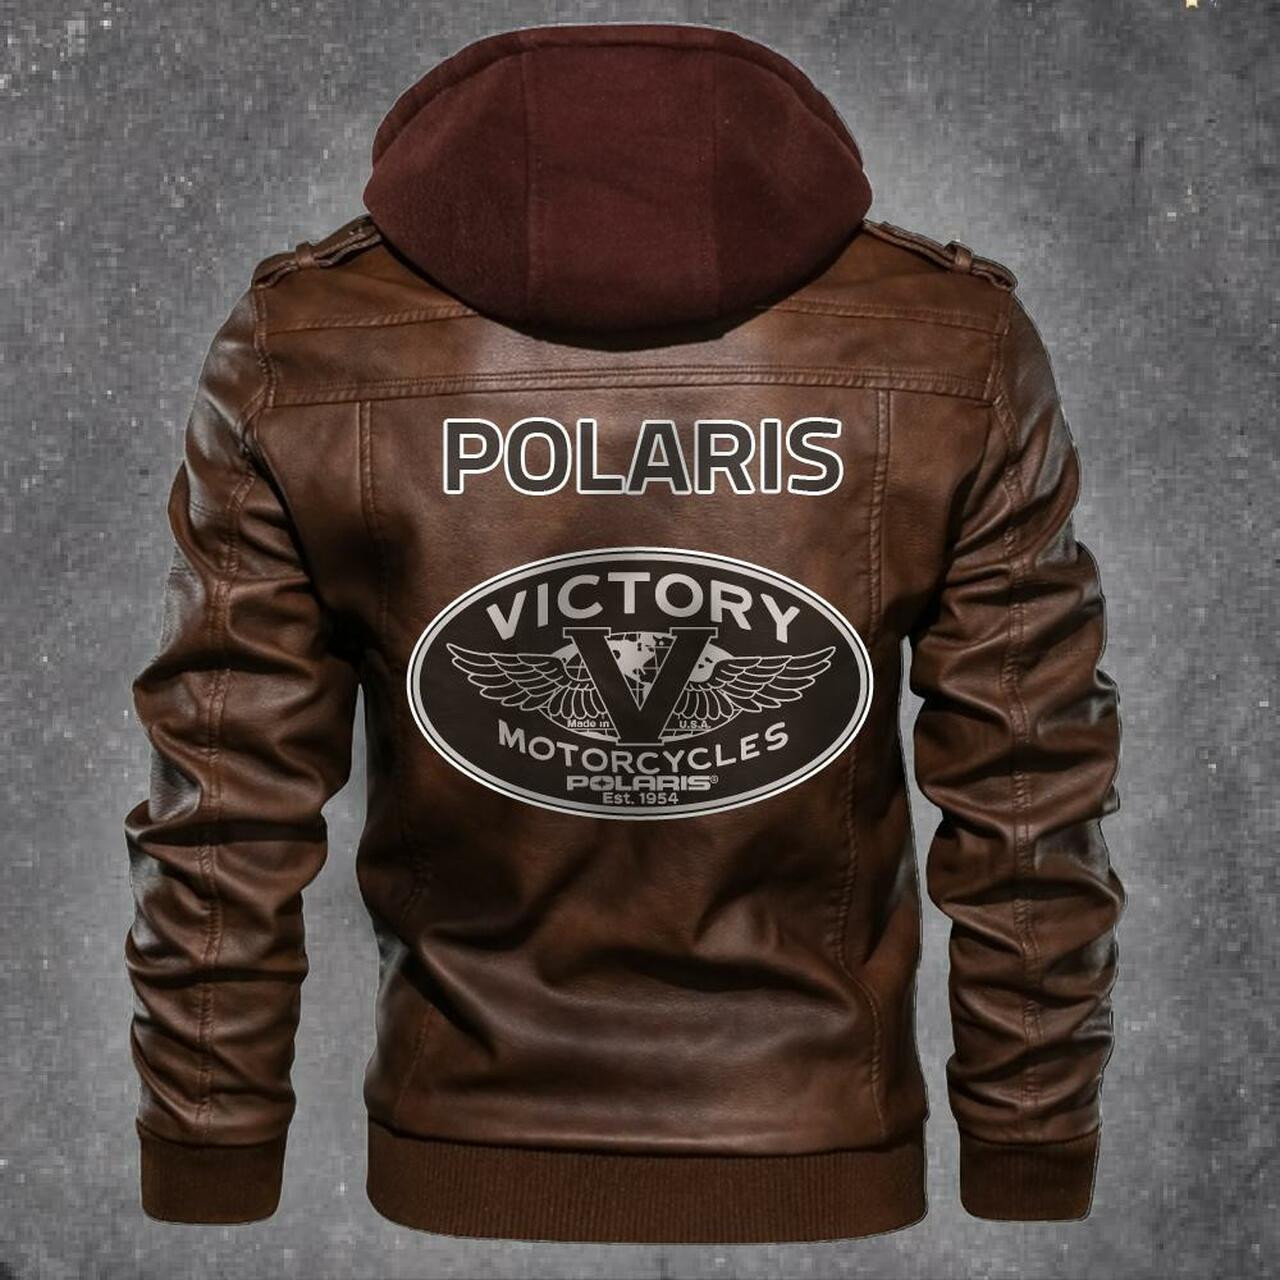 Nice leather jacket For you 212